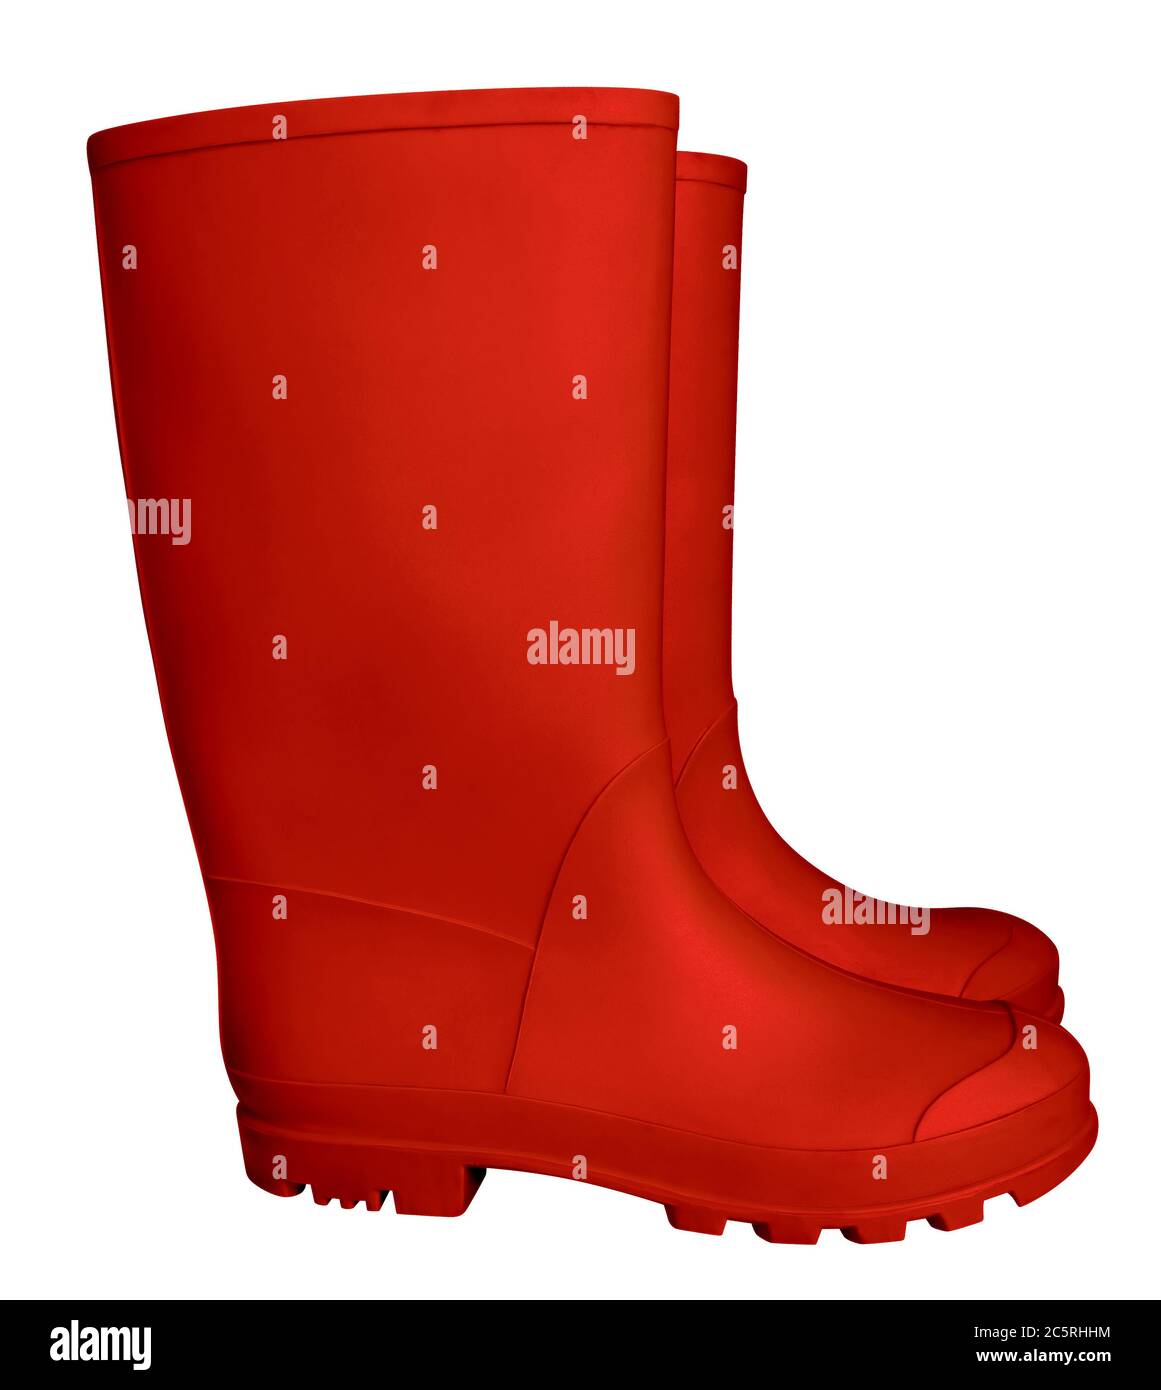 Motivere volatilitet Temerity Page 2 - Pvc Boots High Resolution Stock Photography and Images - Alamy